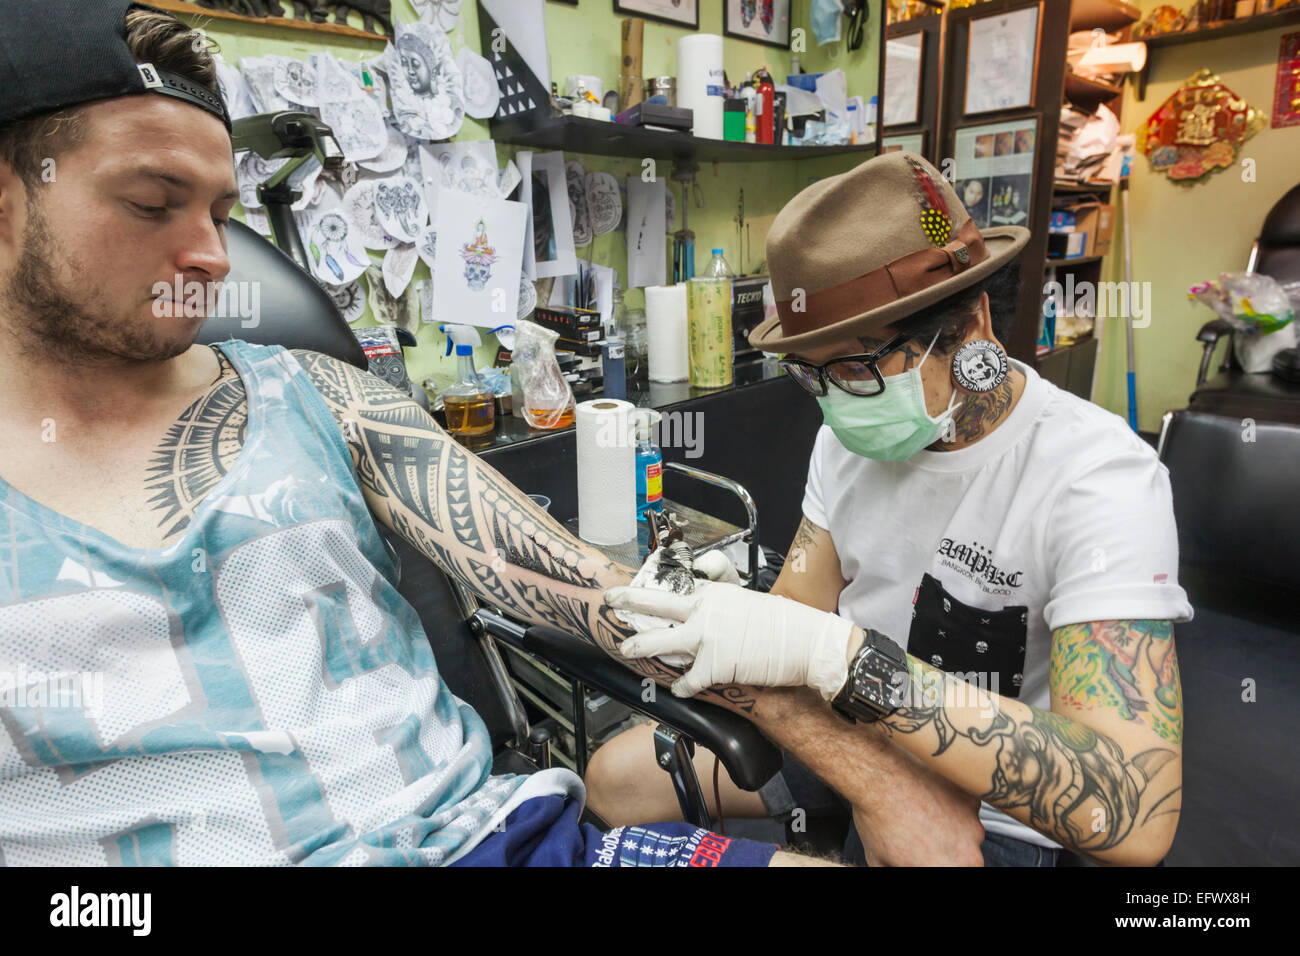 Here is the Best Place to get Best Tattoos In Bangkok - WorthvieW